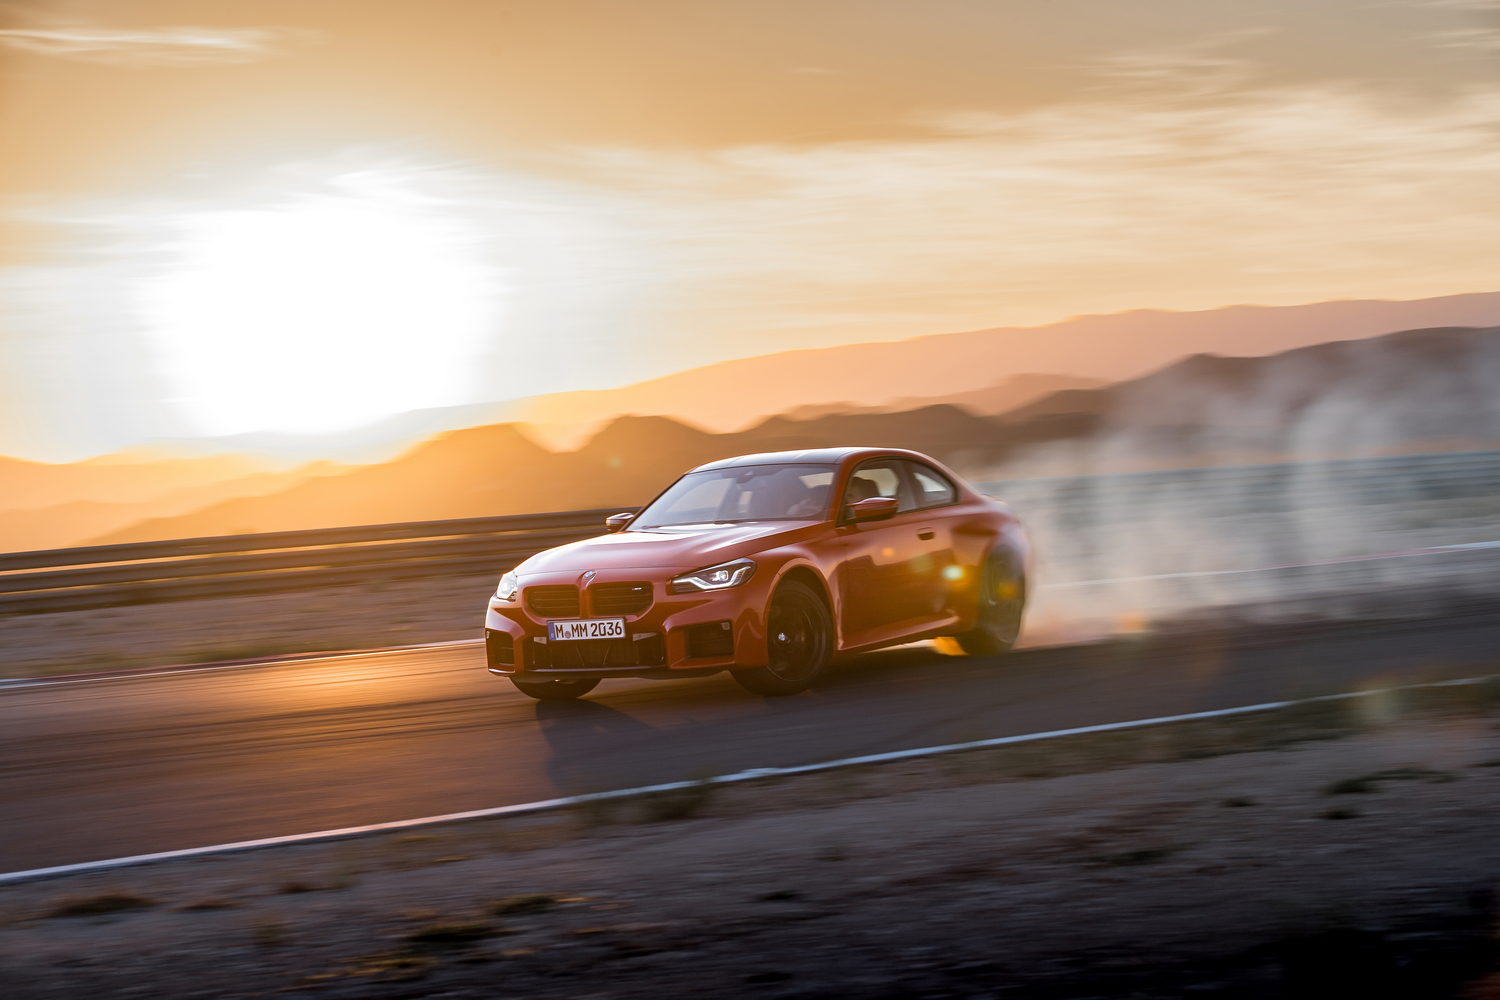 The BMW M2 is back with more power and rear-wheel drive. Image by BMW.